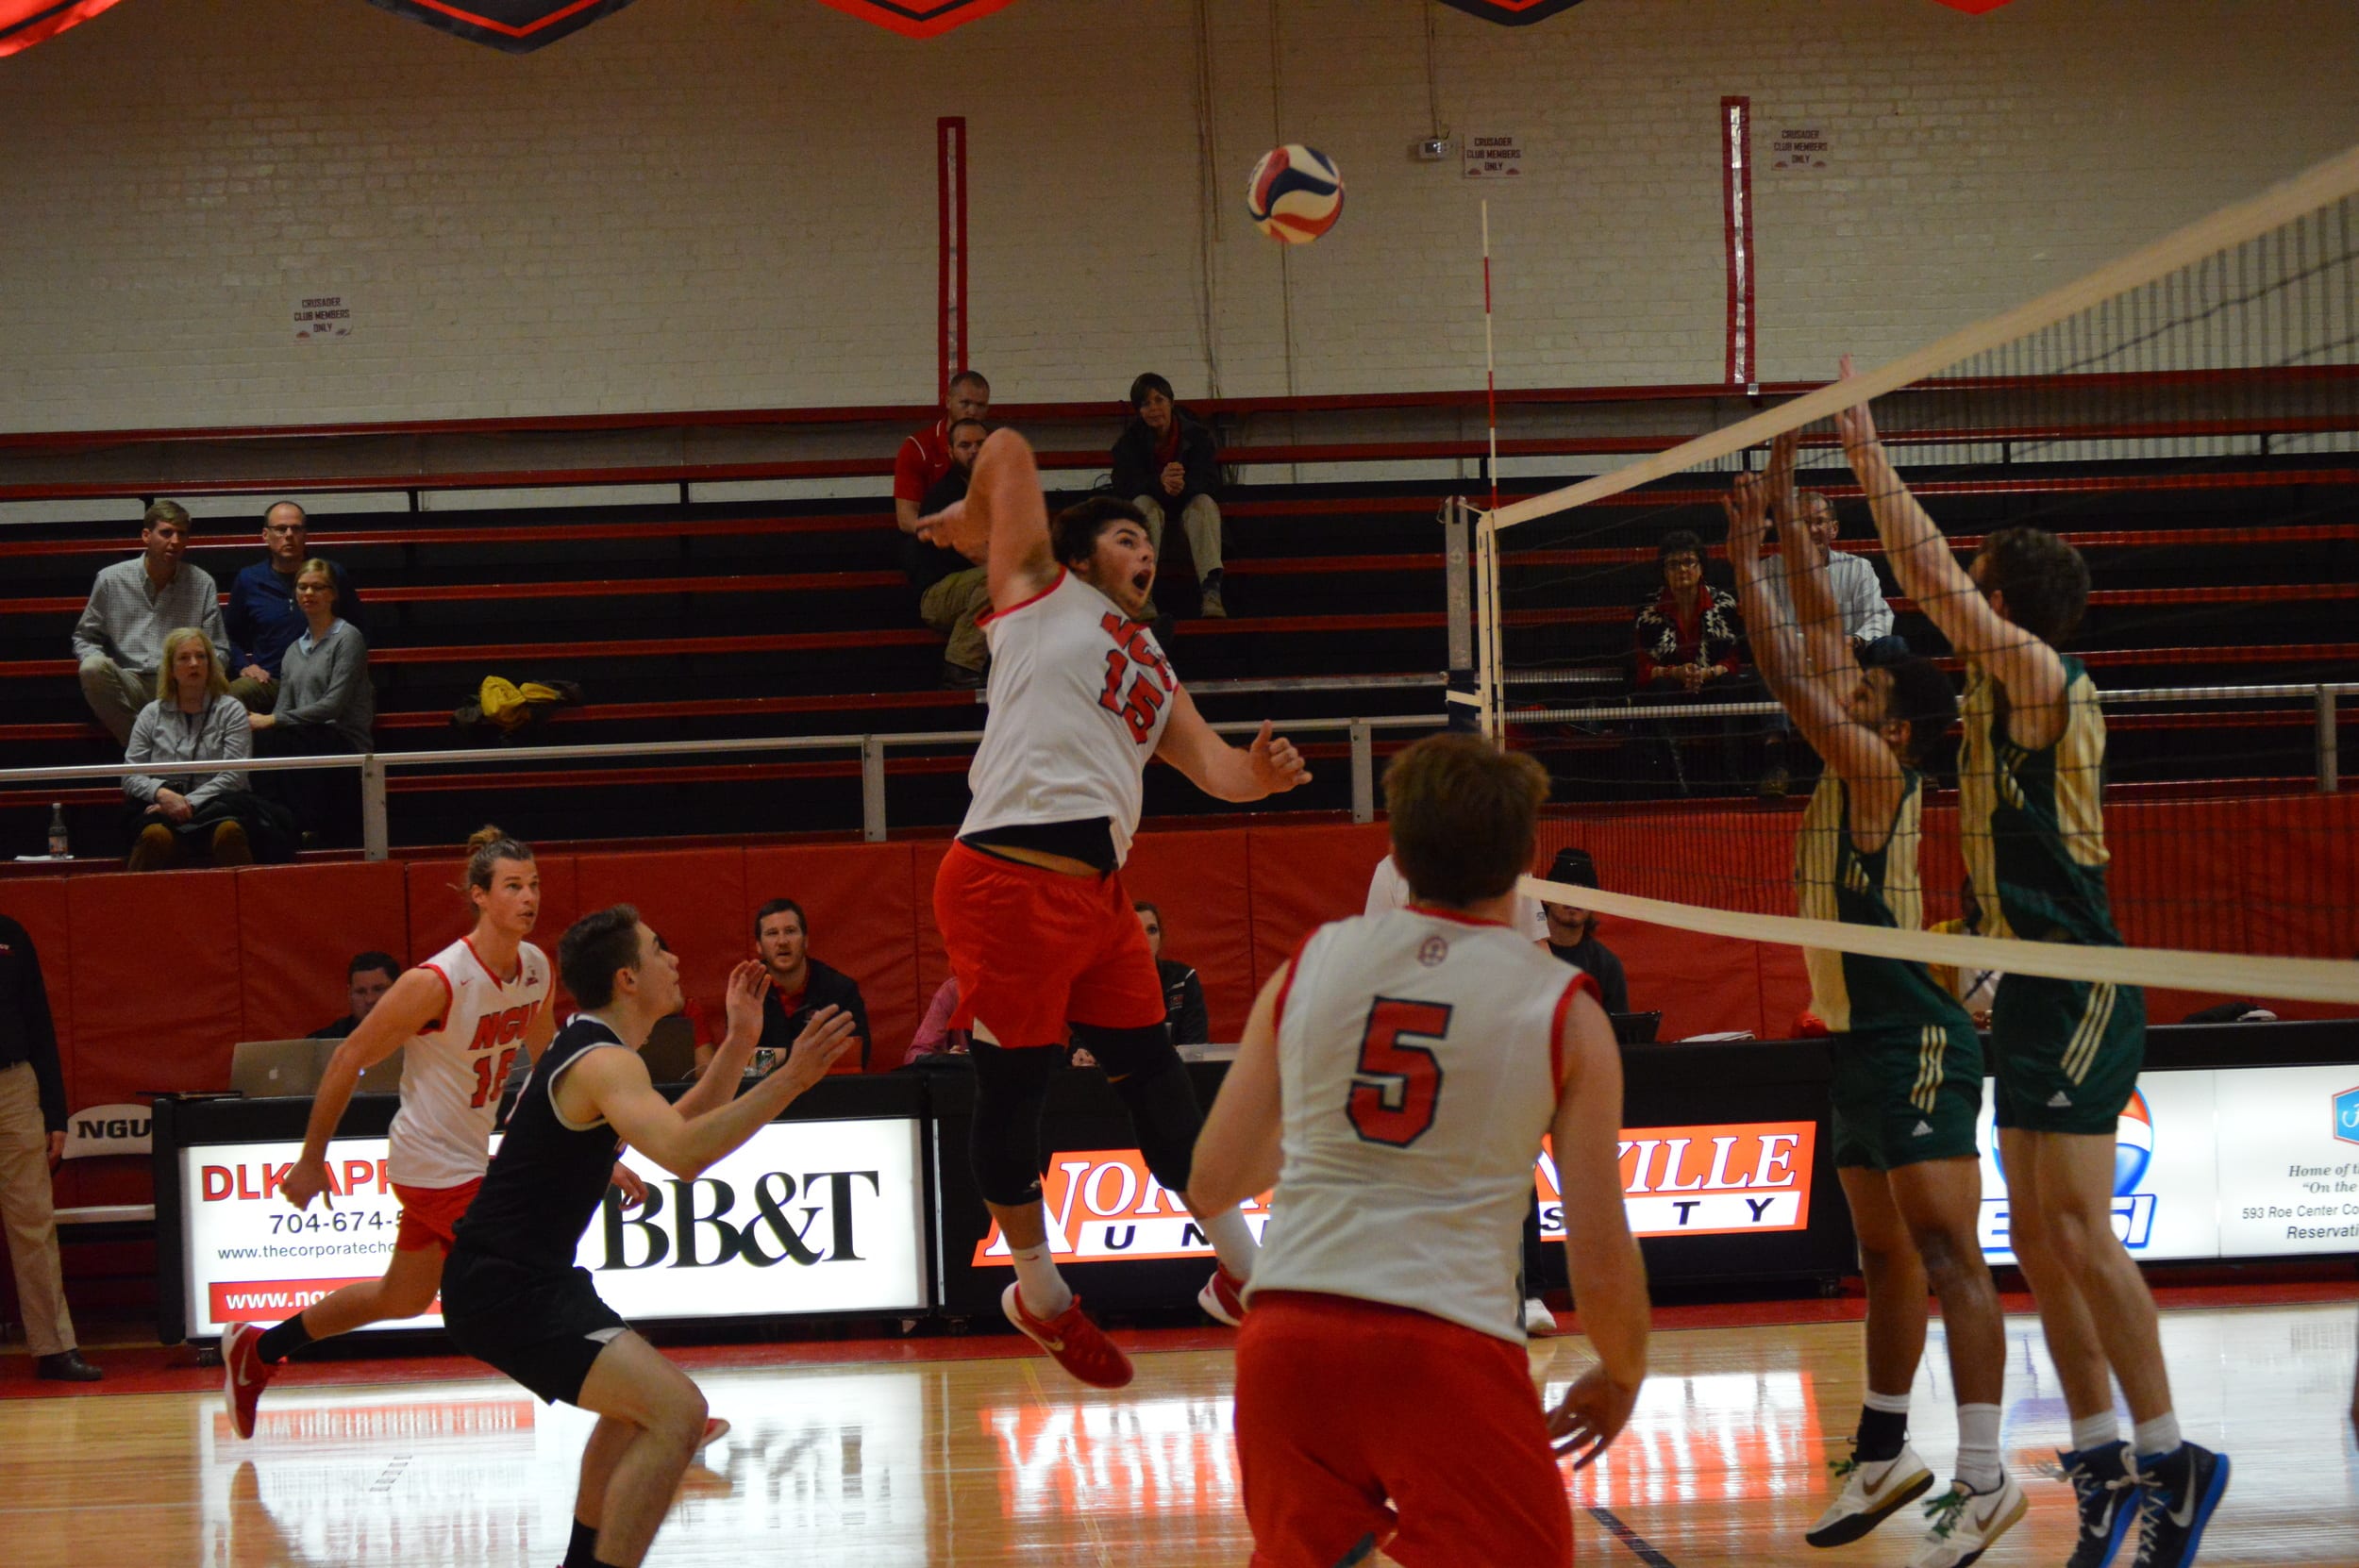 Matthew McManaway jumps up for the spike.